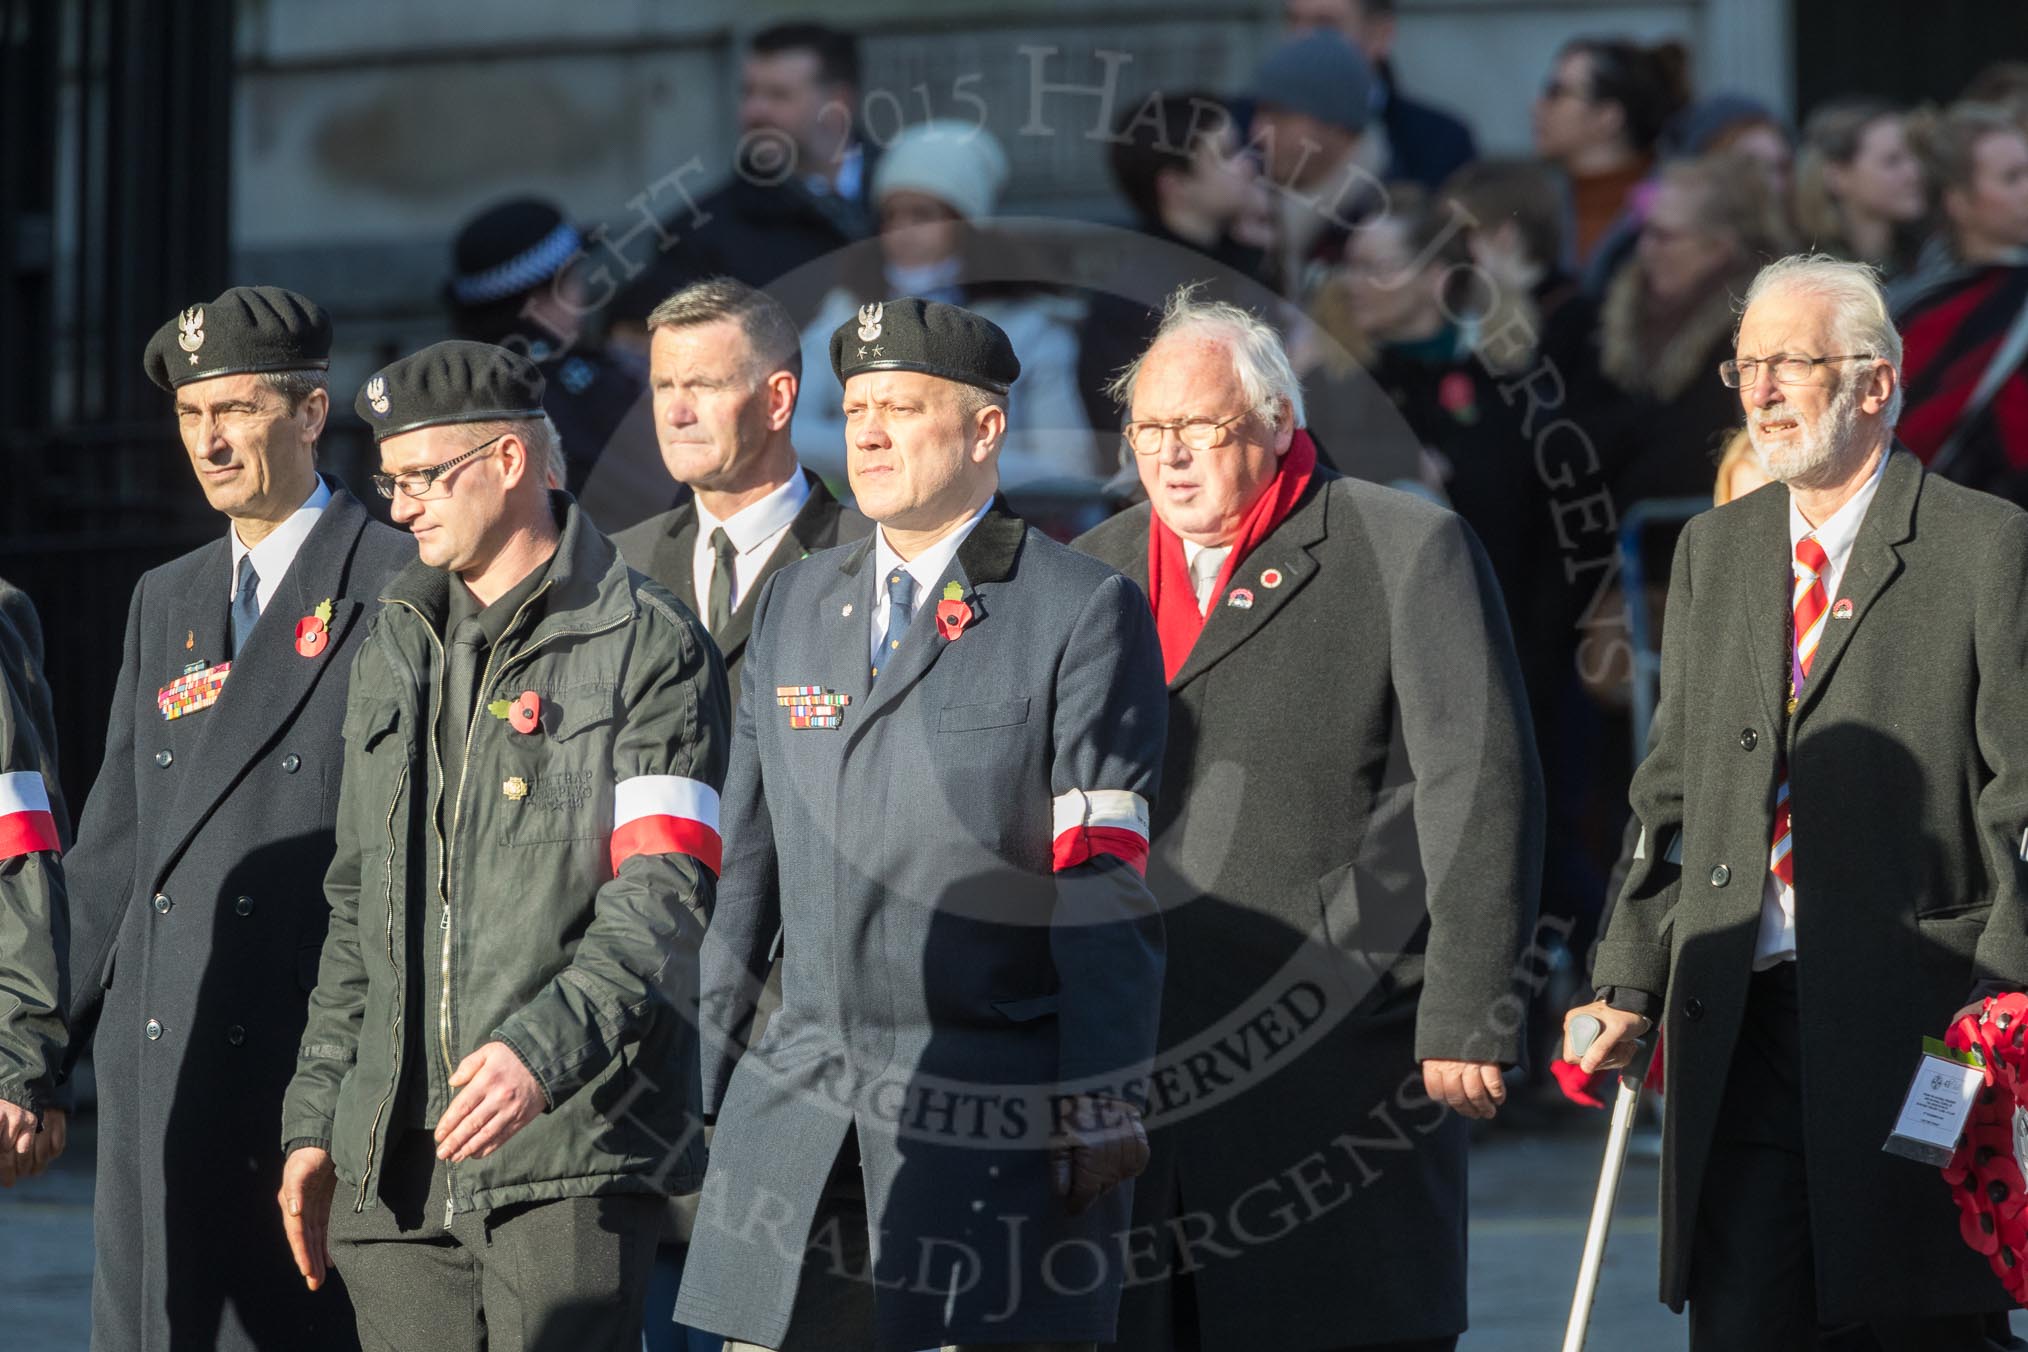 March Past, Remembrance Sunday at the Cenotaph 2016: M42 SPPW - Friends of Polish Veterans Association.
Cenotaph, Whitehall, London SW1,
London,
Greater London,
United Kingdom,
on 13 November 2016 at 13:19, image #2983